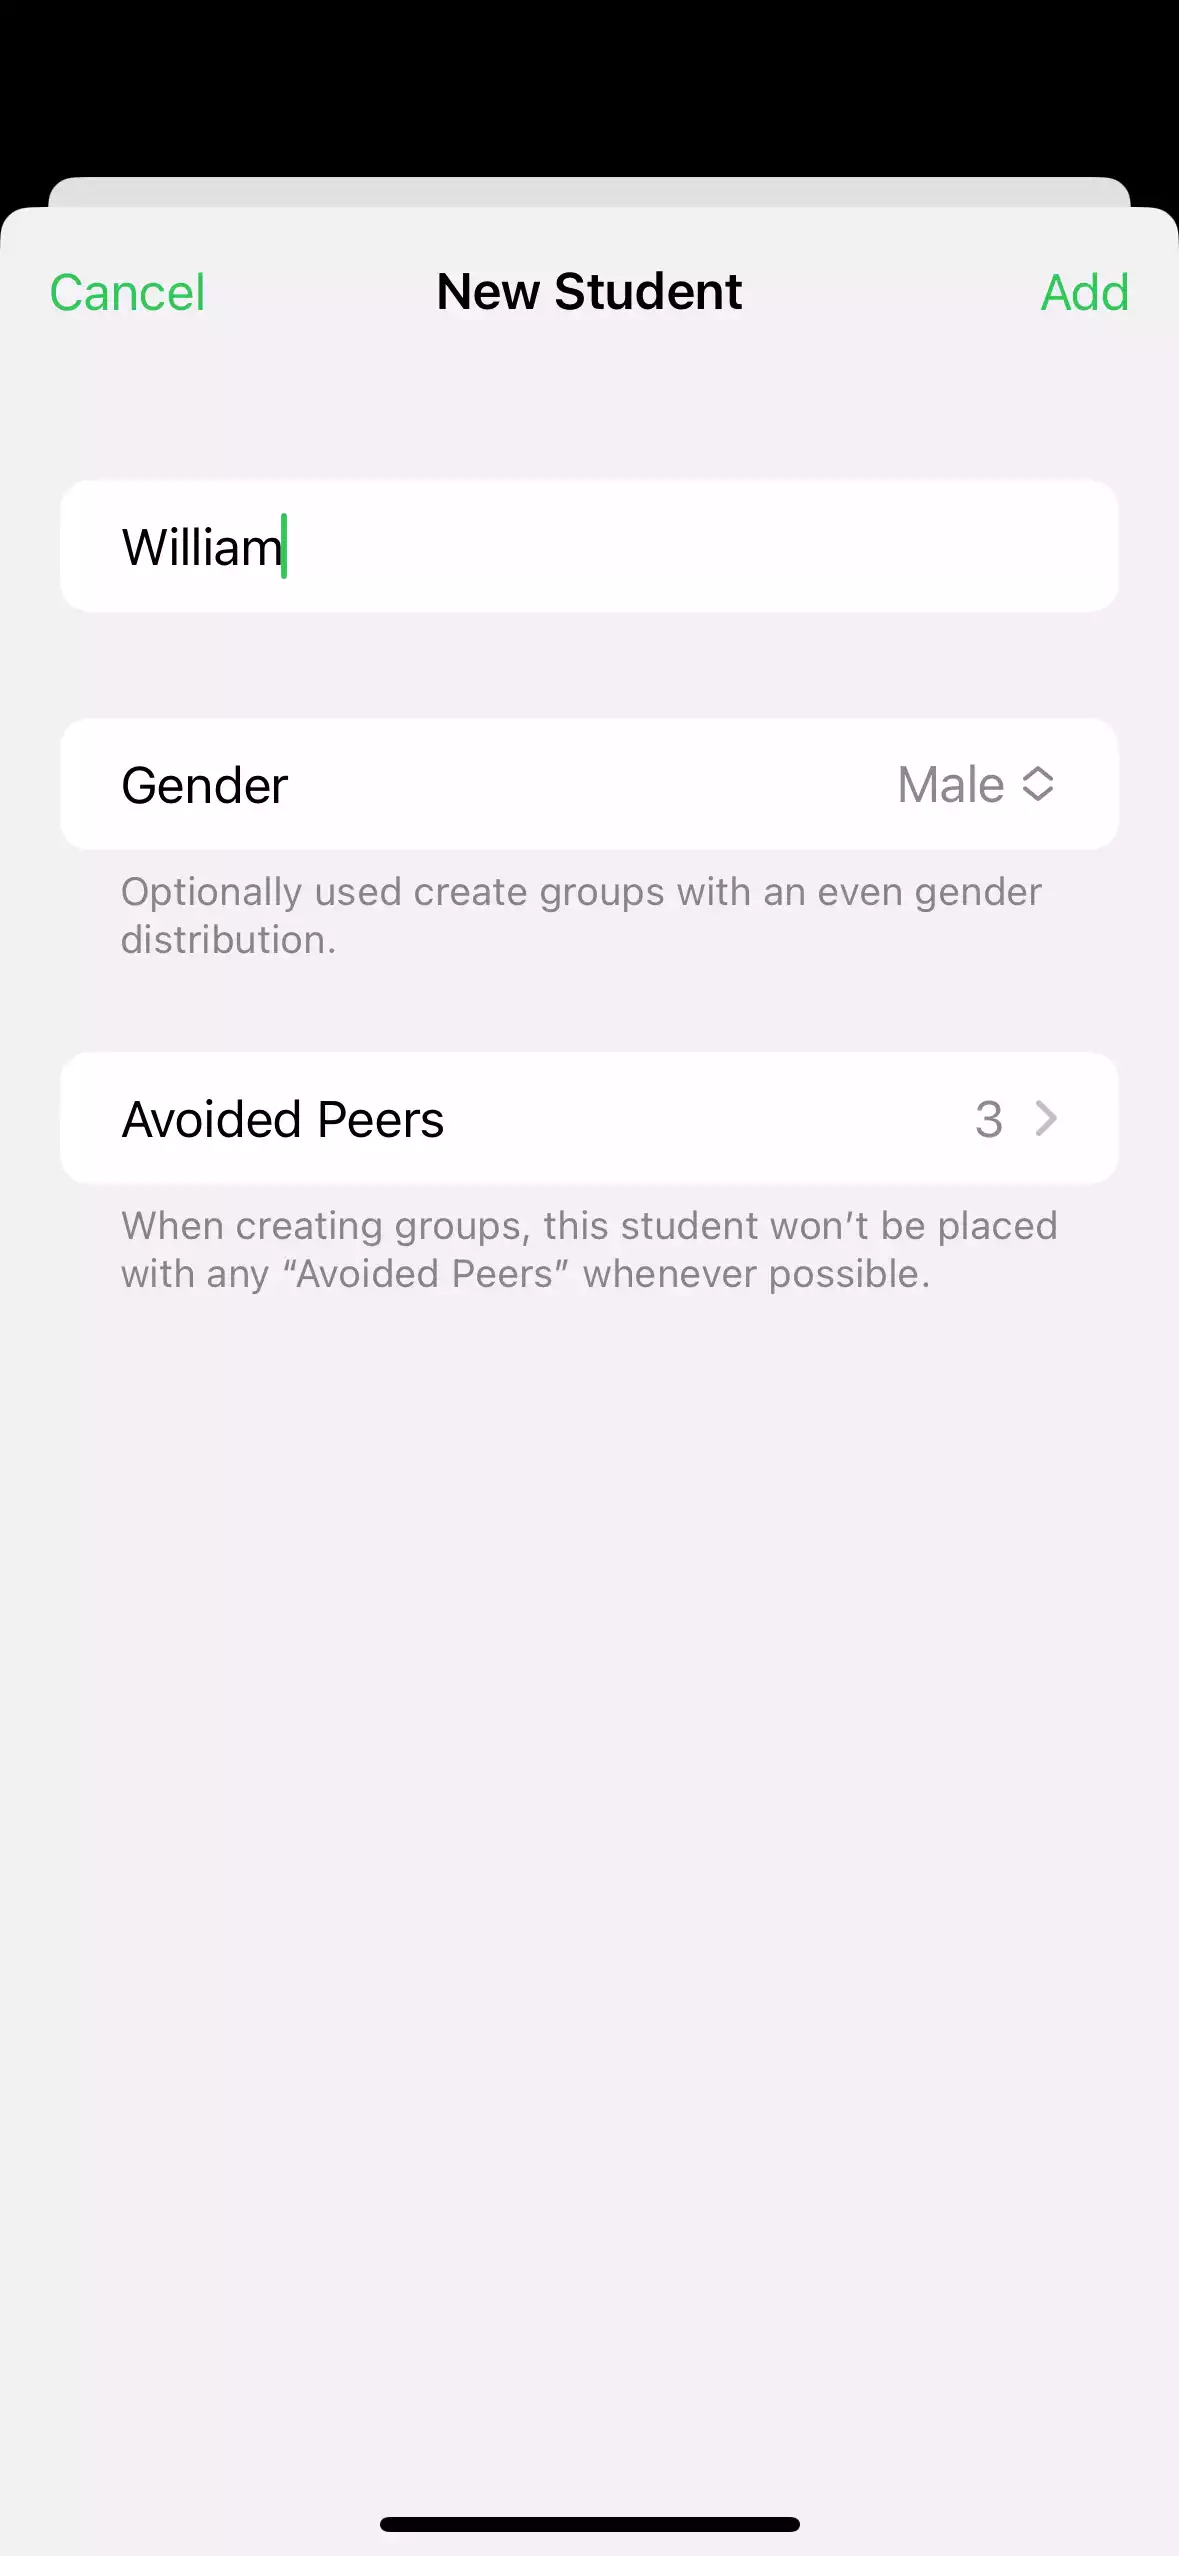 A screenshot of the new student screen, with options including “Gender” and ”Avoided Peers”.